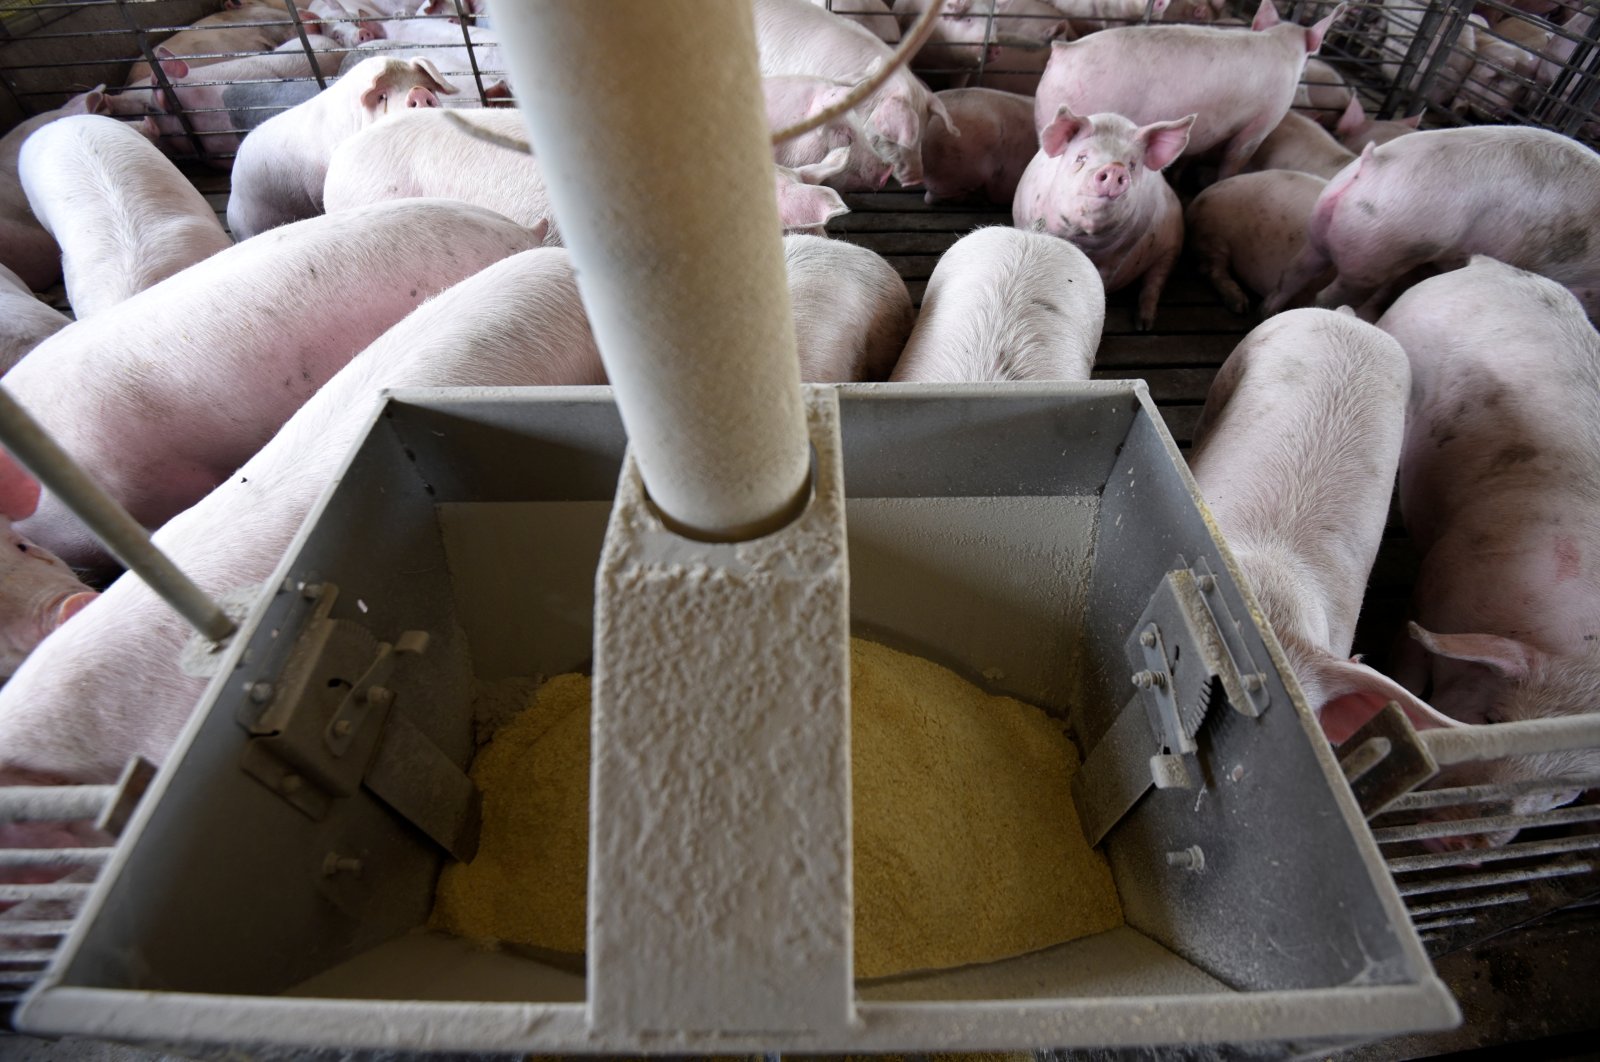 Hog farmer Mike Patterson's diet pig feed, which is part of his efforts to slow how quickly his animals fatten up, a necessity caused by coronavirus disease (COVID-19) related supply chain disruptions, seen in one of his barns in Kenyon, Minnesota, U.S., April 23, 2020. (Reuters Photo)